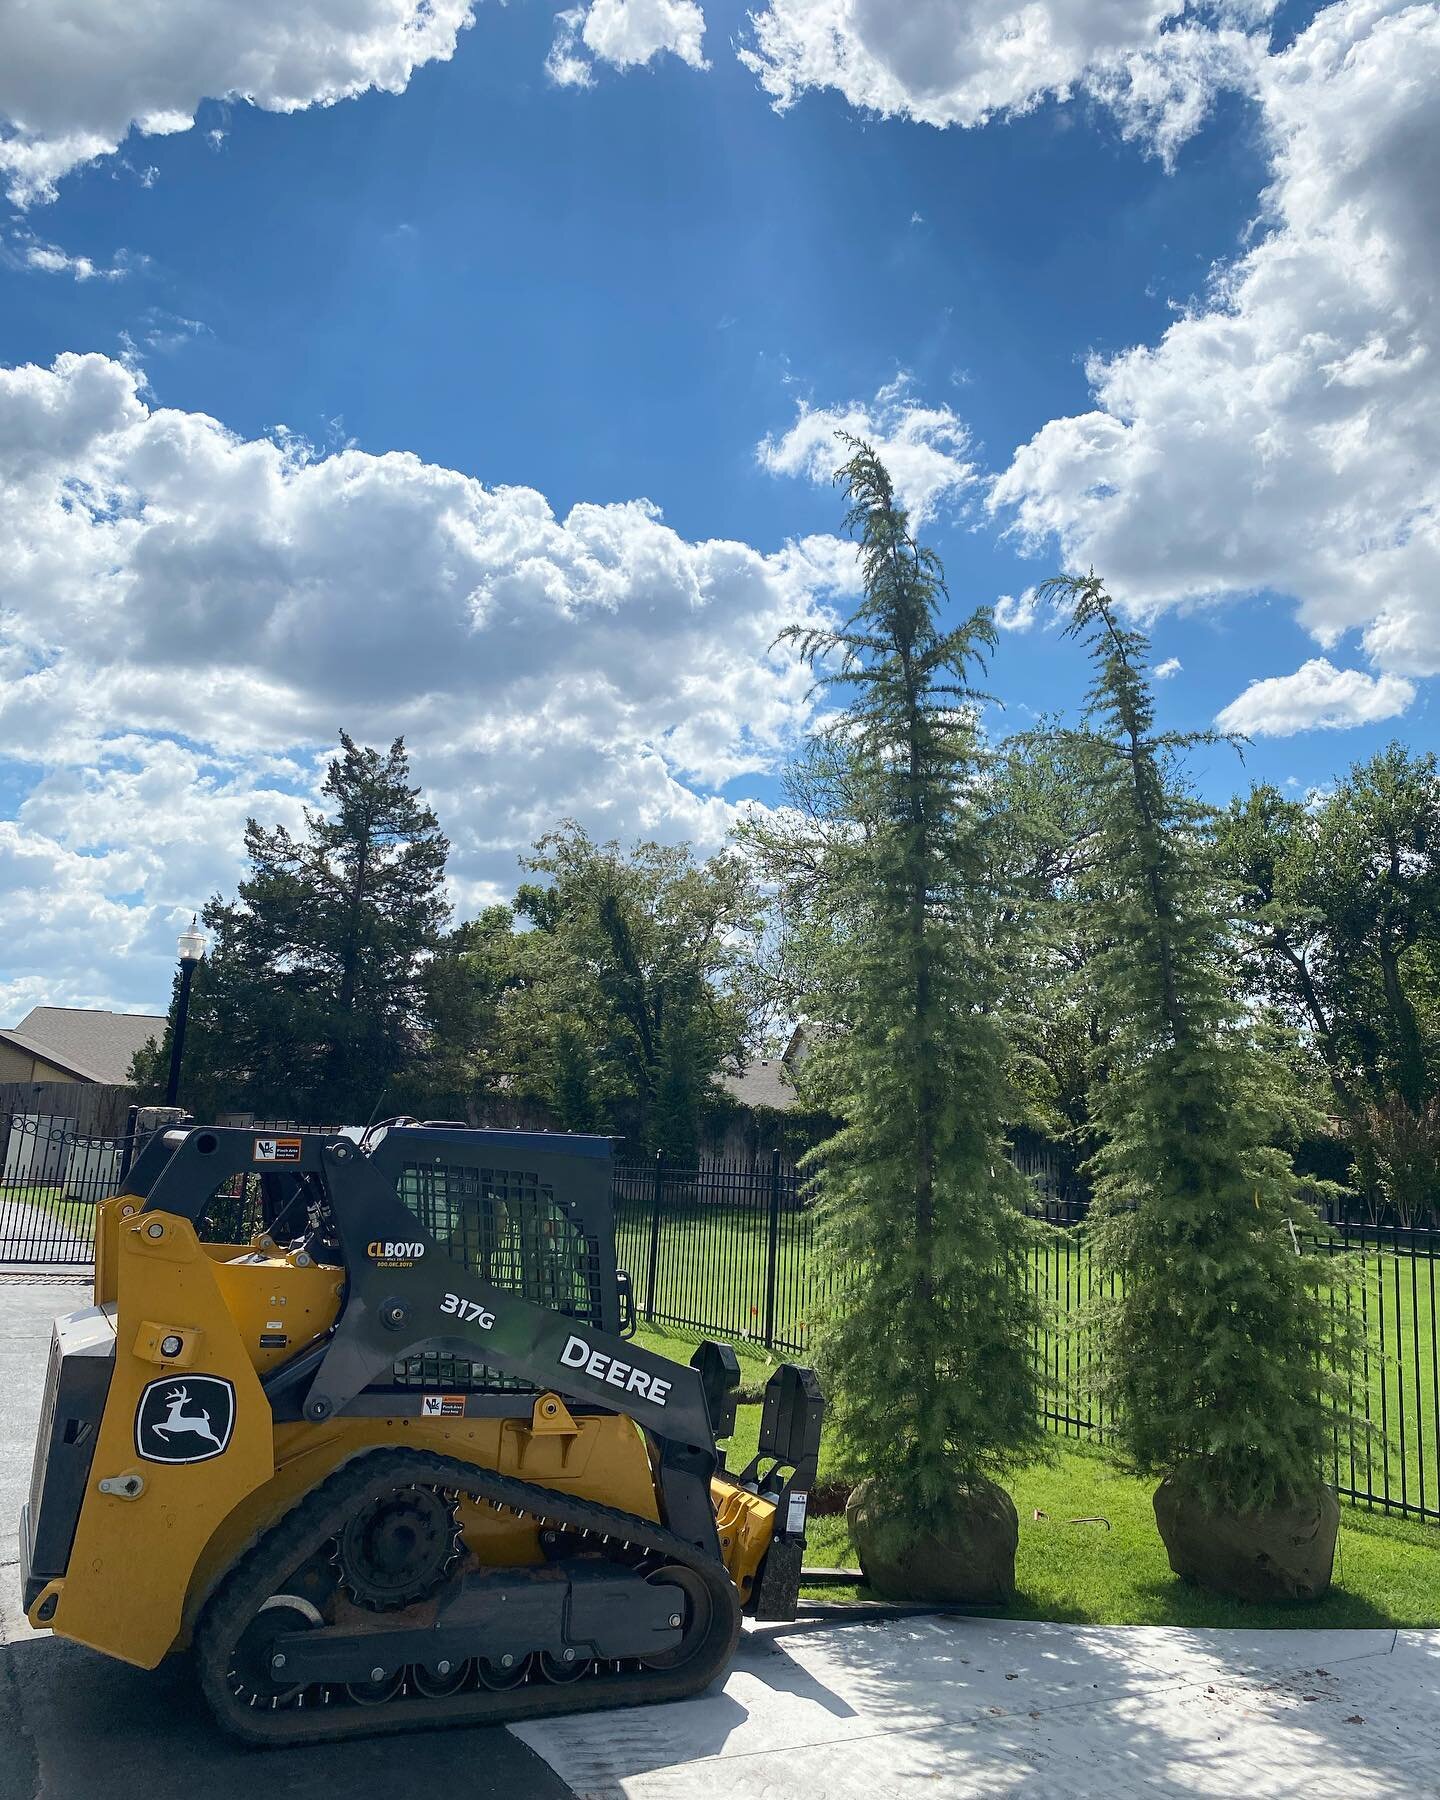 We&rsquo;re breaking ground at this beautiful job in Edmond! These stunning 16&rsquo; Deodora Cedars are going in today. A dry creek bed, boulders, and more trees are soon to come!